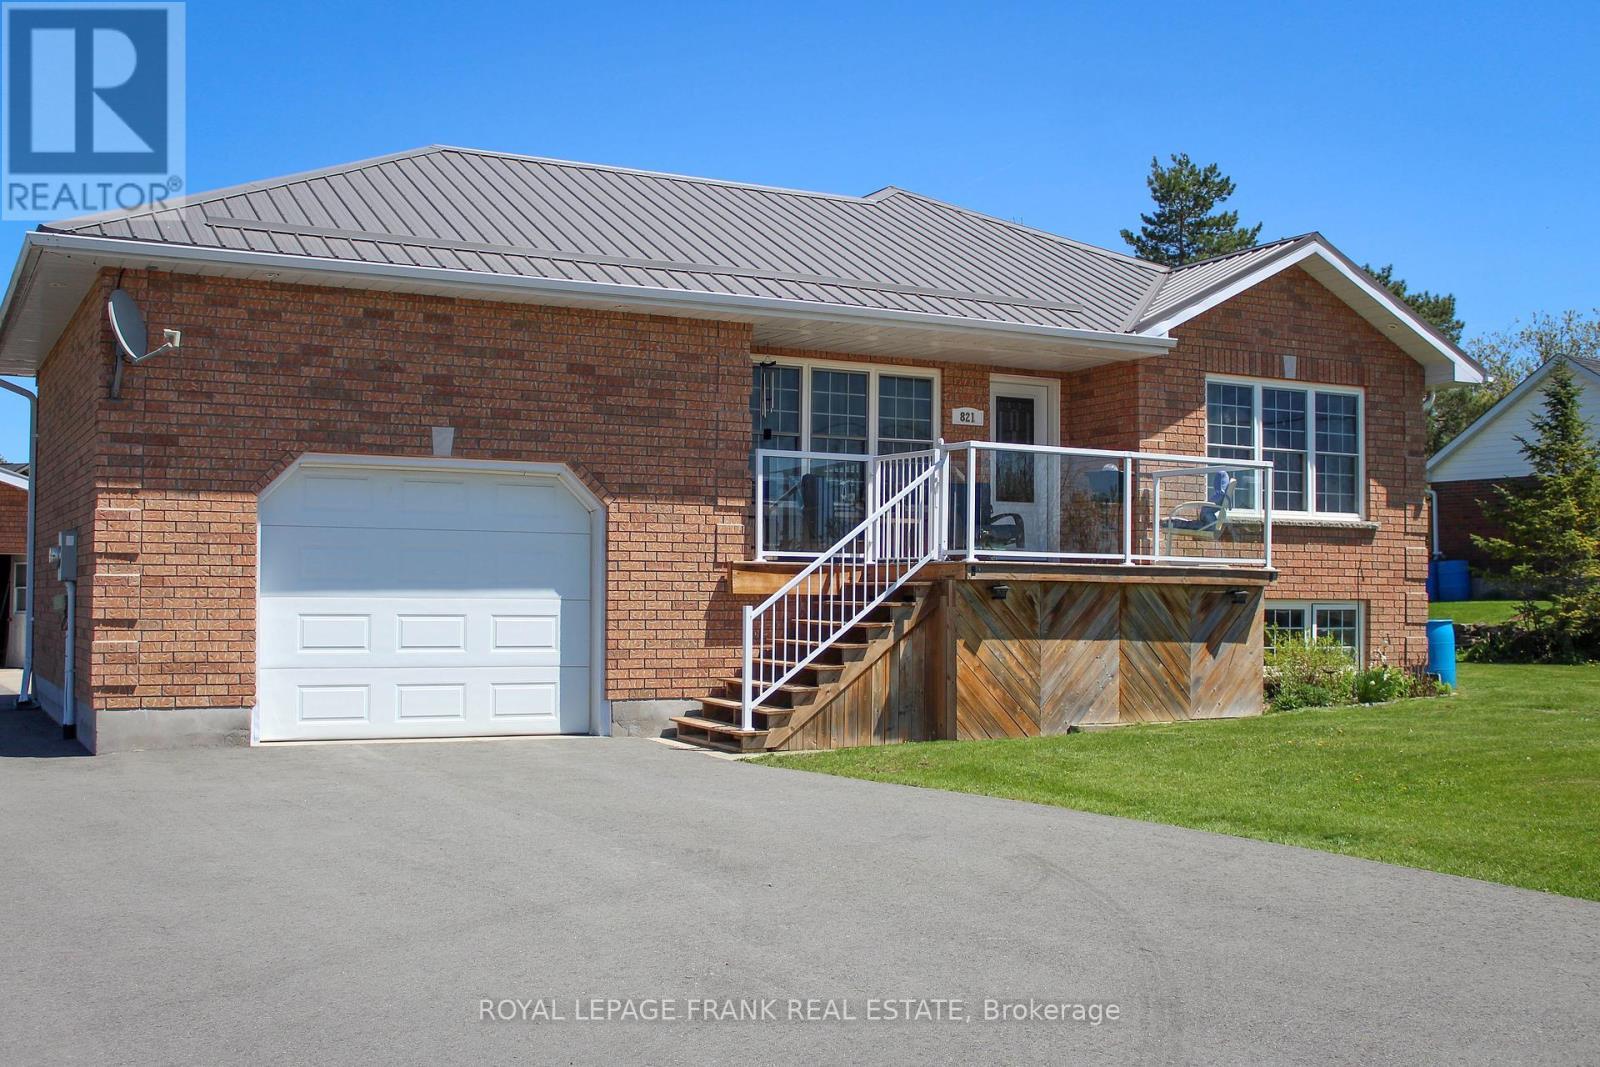 












821 SOUTH ST

,
Douro-Dummer,




Ontario
K0L3A0

